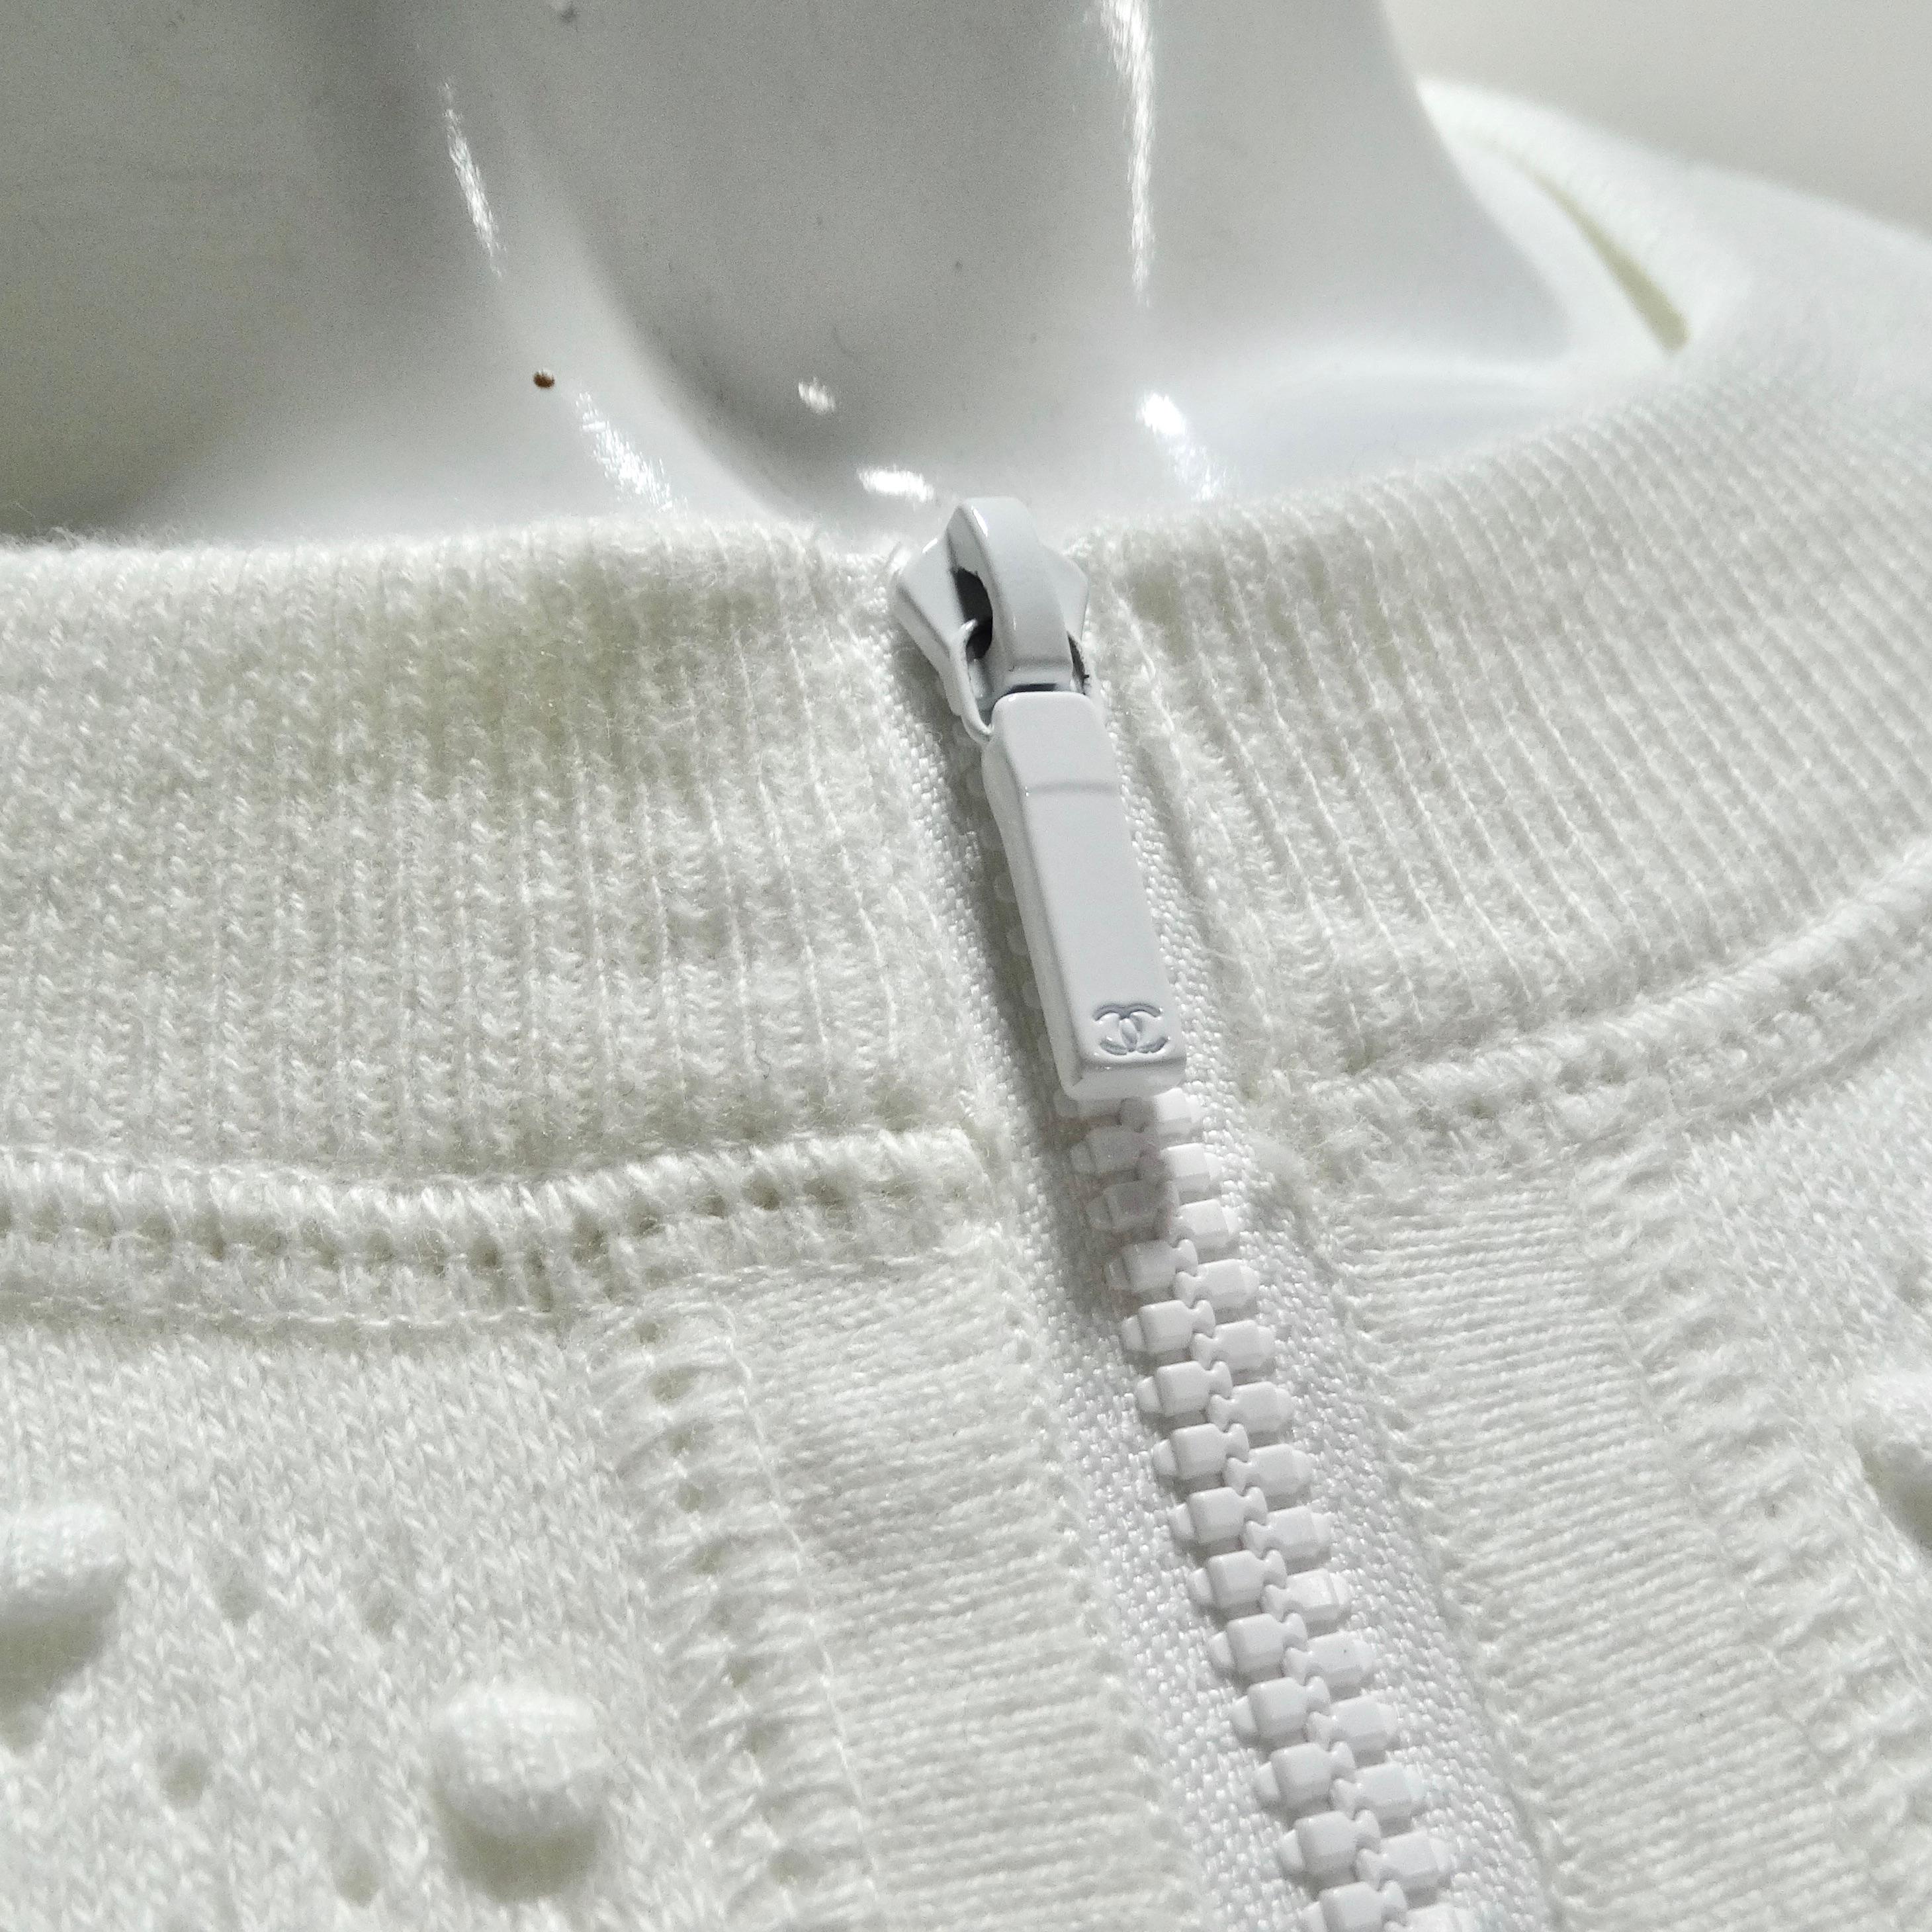 Chanel White Perforated Knit Zip Up Sweater In Excellent Condition For Sale In Scottsdale, AZ